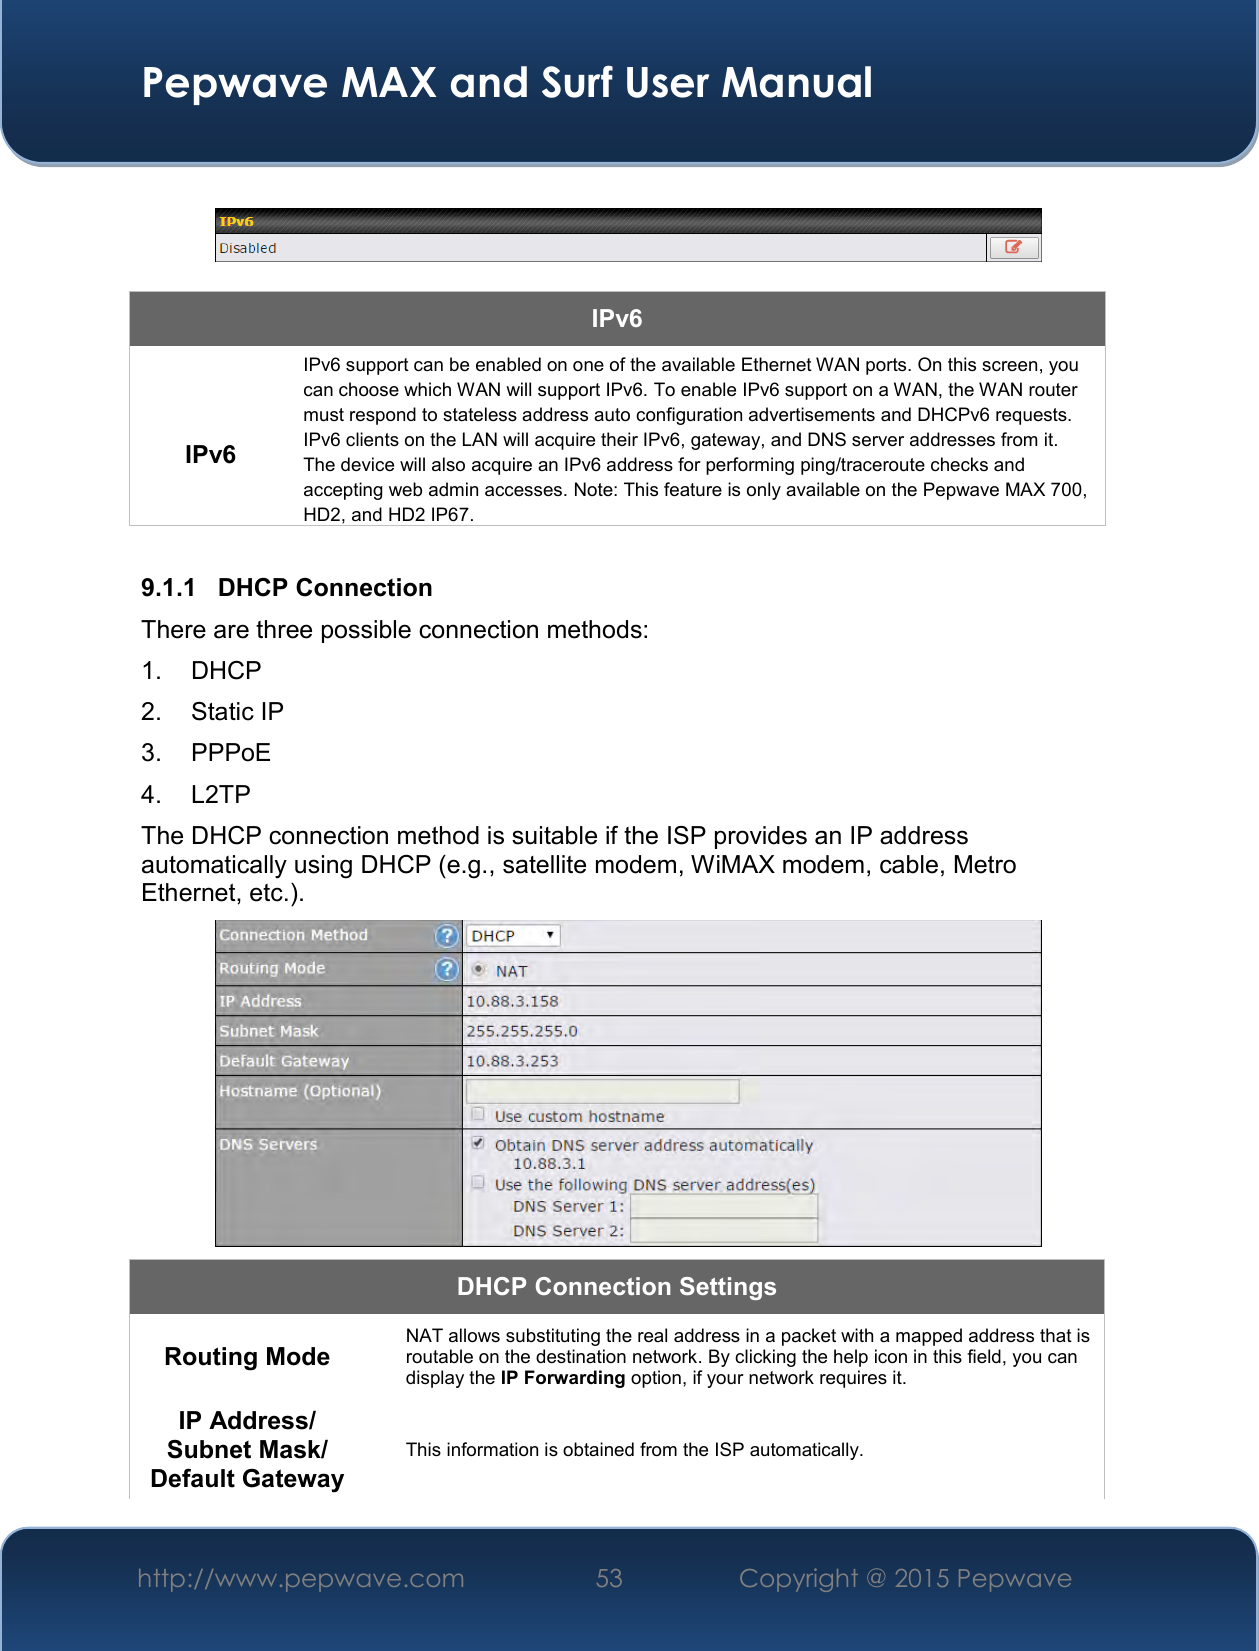  Pepwave MAX and Surf User Manual http://www.pepwave.com 53   Copyright @ 2015 Pepwave      IPv6  IPv6 IPv6 support can be enabled on one of the available Ethernet WAN ports. On this screen, you can choose which WAN will support IPv6. To enable IPv6 support on a WAN, the WAN router must respond to stateless address auto configuration advertisements and DHCPv6 requests. IPv6 clients on the LAN will acquire their IPv6, gateway, and DNS server addresses from it. The device will also acquire an IPv6 address for performing ping/traceroute checks and accepting web admin accesses. Note: This feature is only available on the Pepwave MAX 700, HD2, and HD2 IP67.  9.1.1  DHCP Connection There are three possible connection methods:  1. DHCP 2.  Static IP 3.  PPPoE 4.  L2TP The DHCP connection method is suitable if the ISP provides an IP address automatically using DHCP (e.g., satellite modem, WiMAX modem, cable, Metro Ethernet, etc.).  DHCP Connection Settings  Routing Mode  NAT allows substituting the real address in a packet with a mapped address that is routable on the destination network. By clicking the help icon in this field, you can display the IP Forwarding option, if your network requires it. IP Address/ Subnet Mask/ Default Gateway This information is obtained from the ISP automatically. 